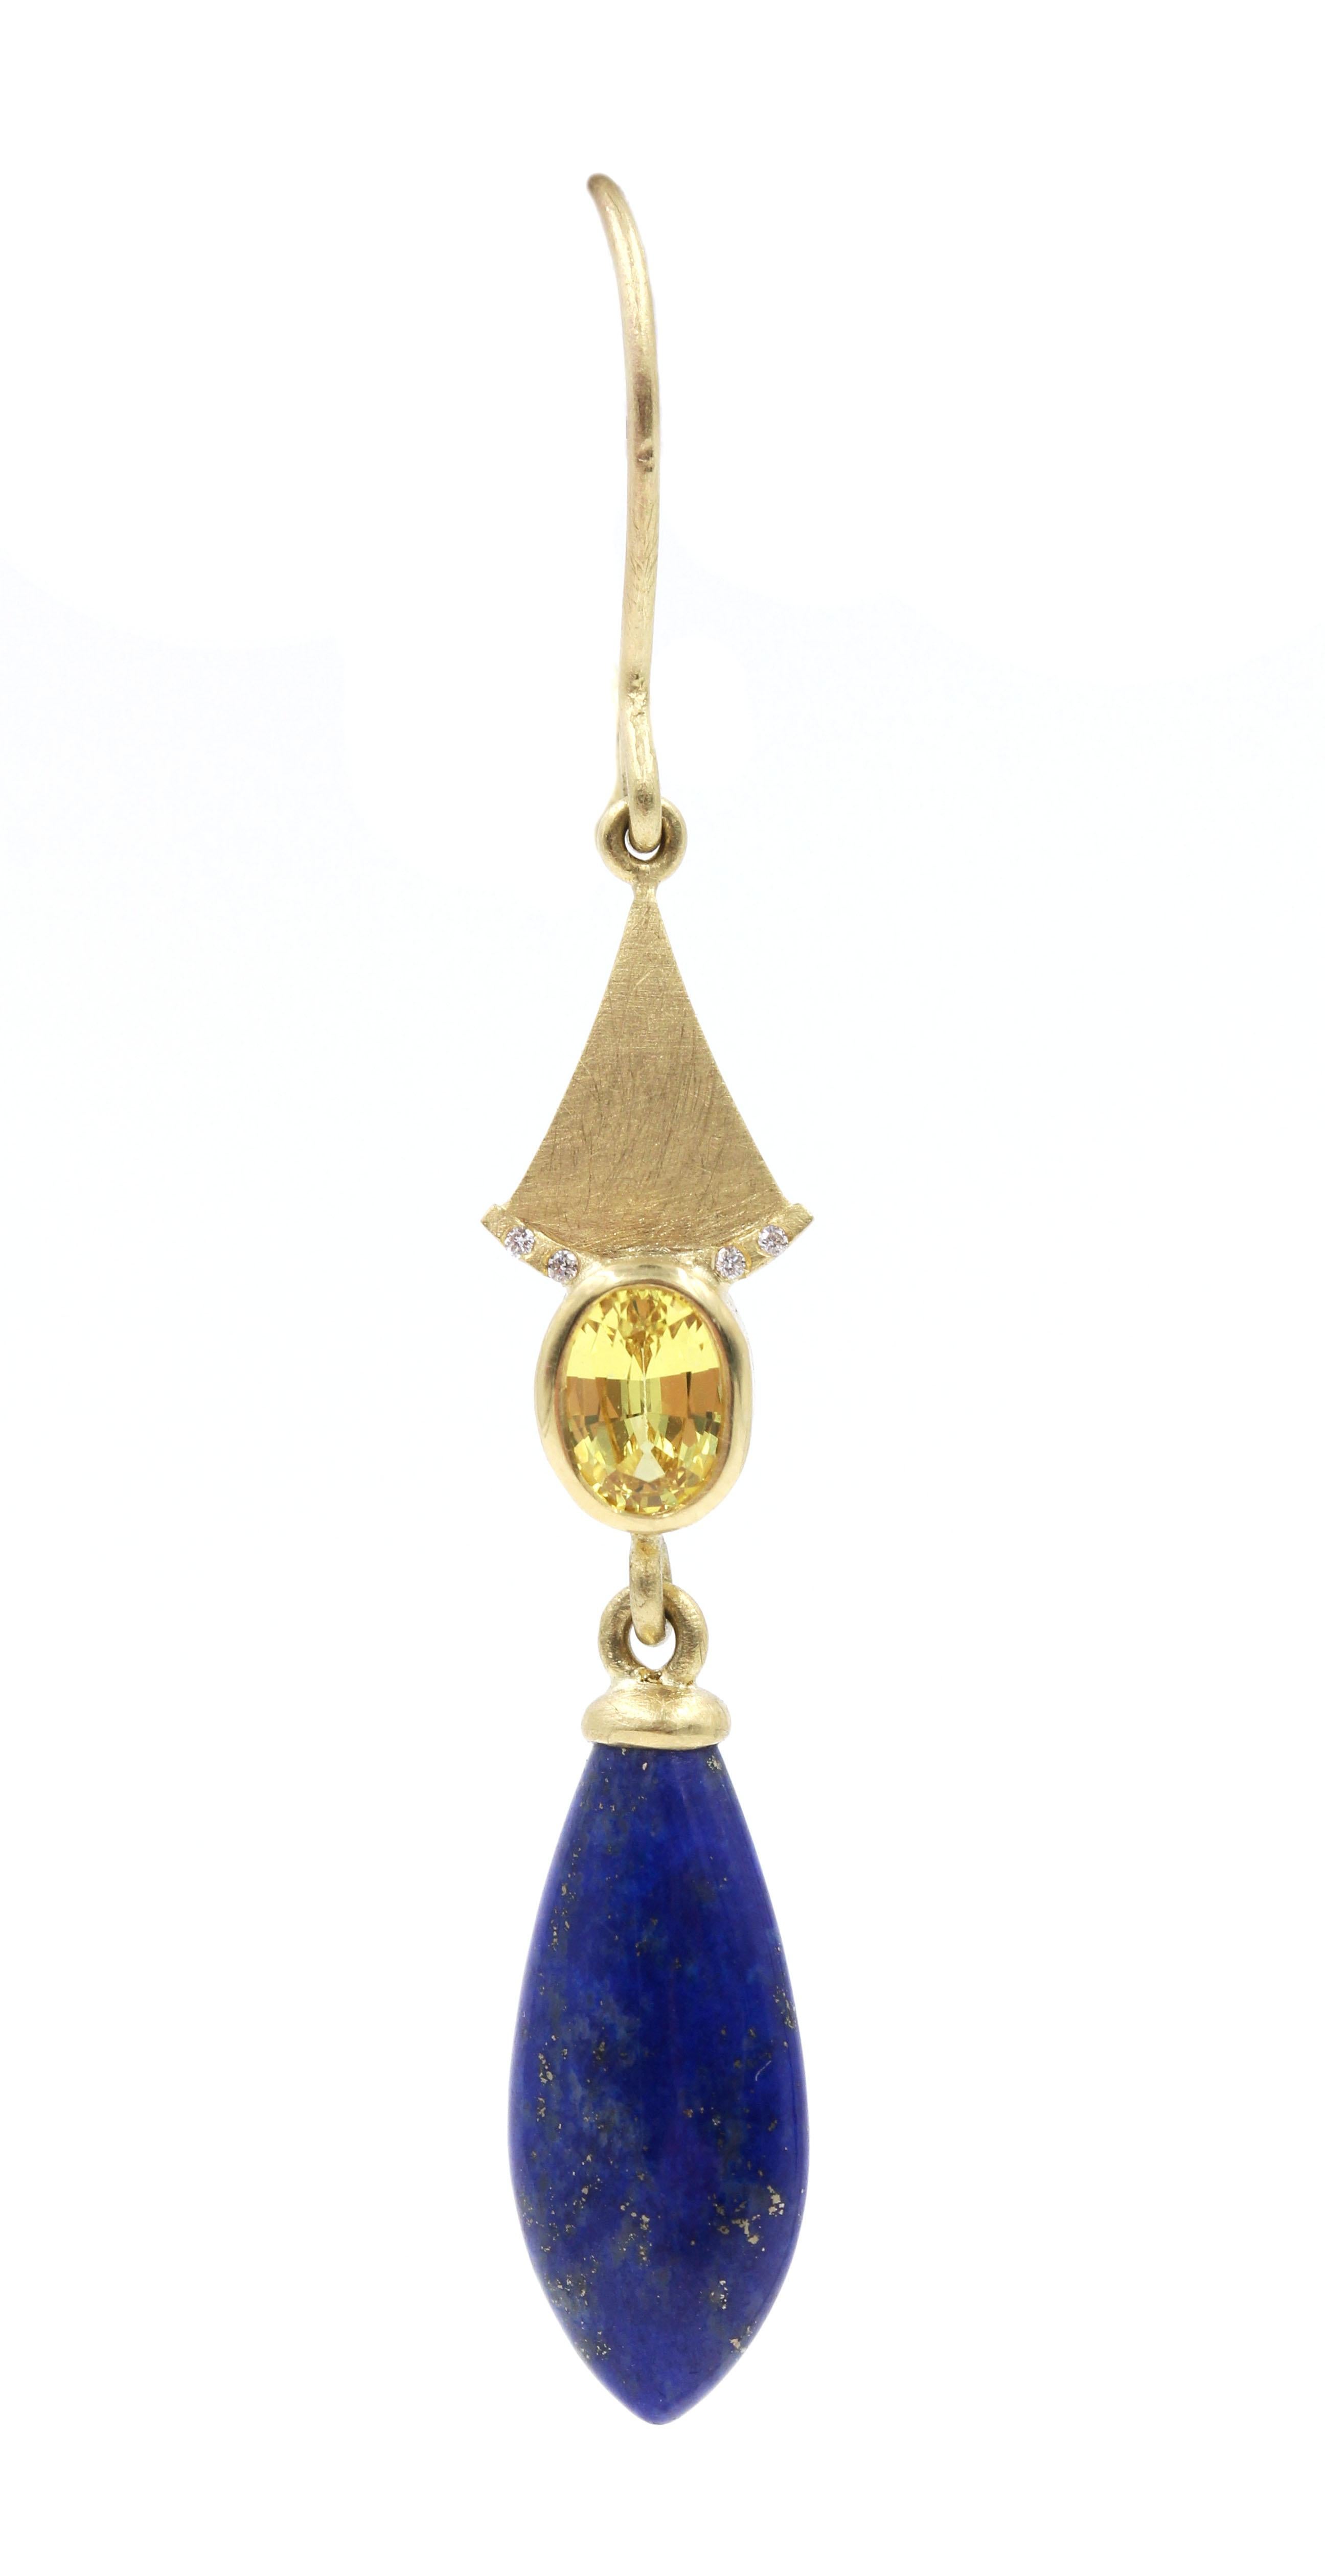 Robin Waynee
Yellow Sapphire & Lapis Earrings, 2019
VS1 Diamonds, 18K Gold, Yellow Sapphire & Lapis

Robin has an unprecedented record at the Saul Bell Design Awards, one of the most prestigious international jewelry competitions. She earned First